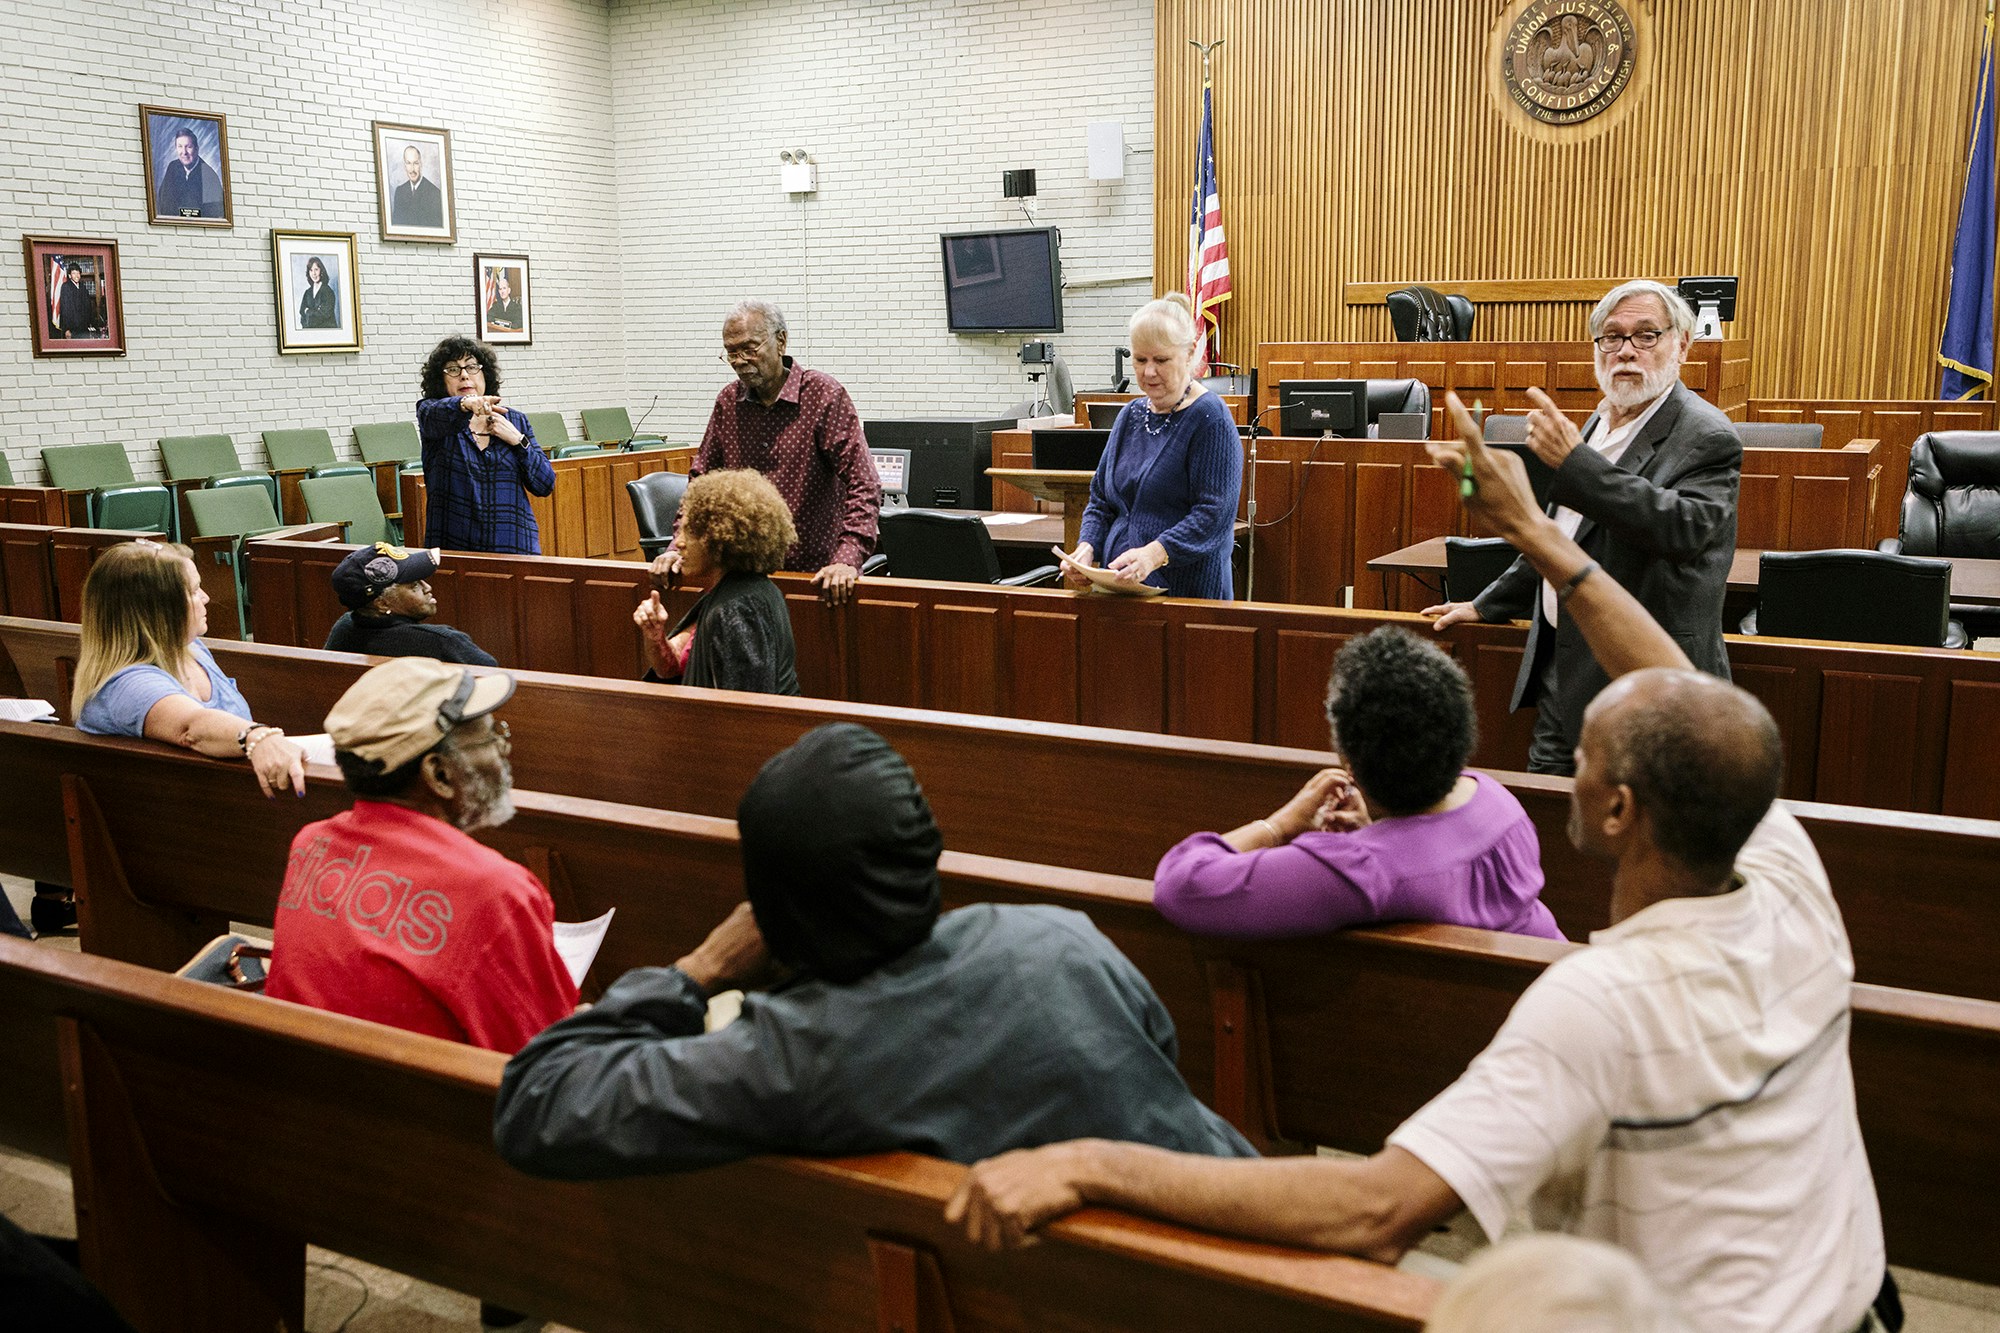 Edgard, LA - Feb. 20, 2017 - Community members and the Concerned Citizens of St. John Parish discuss concerns during a meeting held at the St. John Parish Clerk of Court.